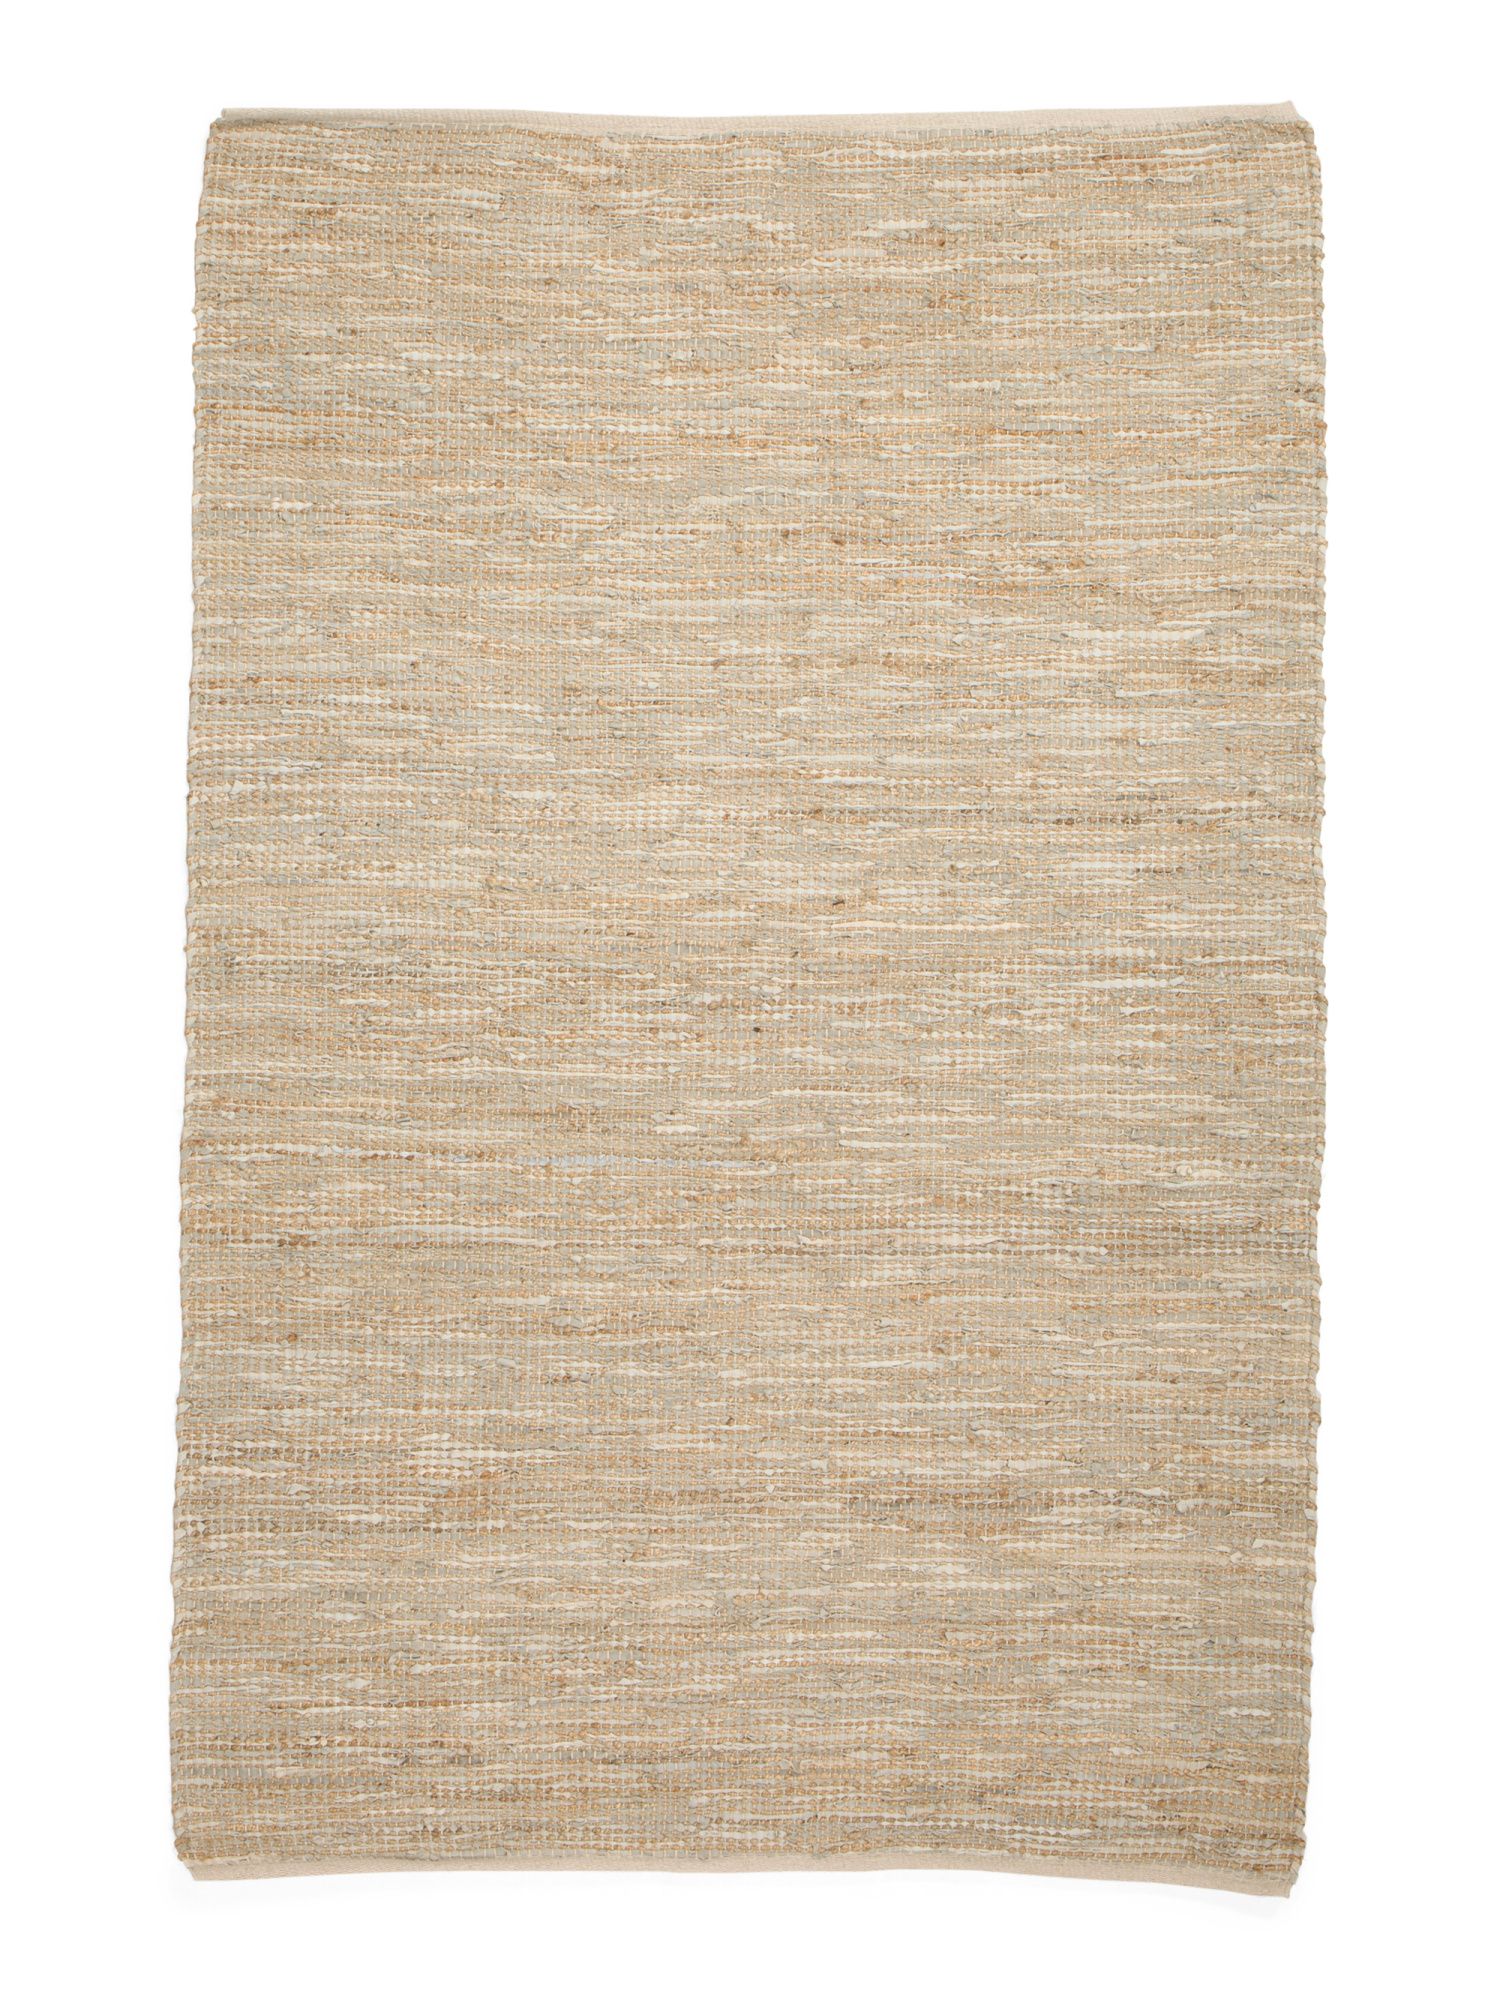 Hand Woven Leather And Jute Rug | TJ Maxx